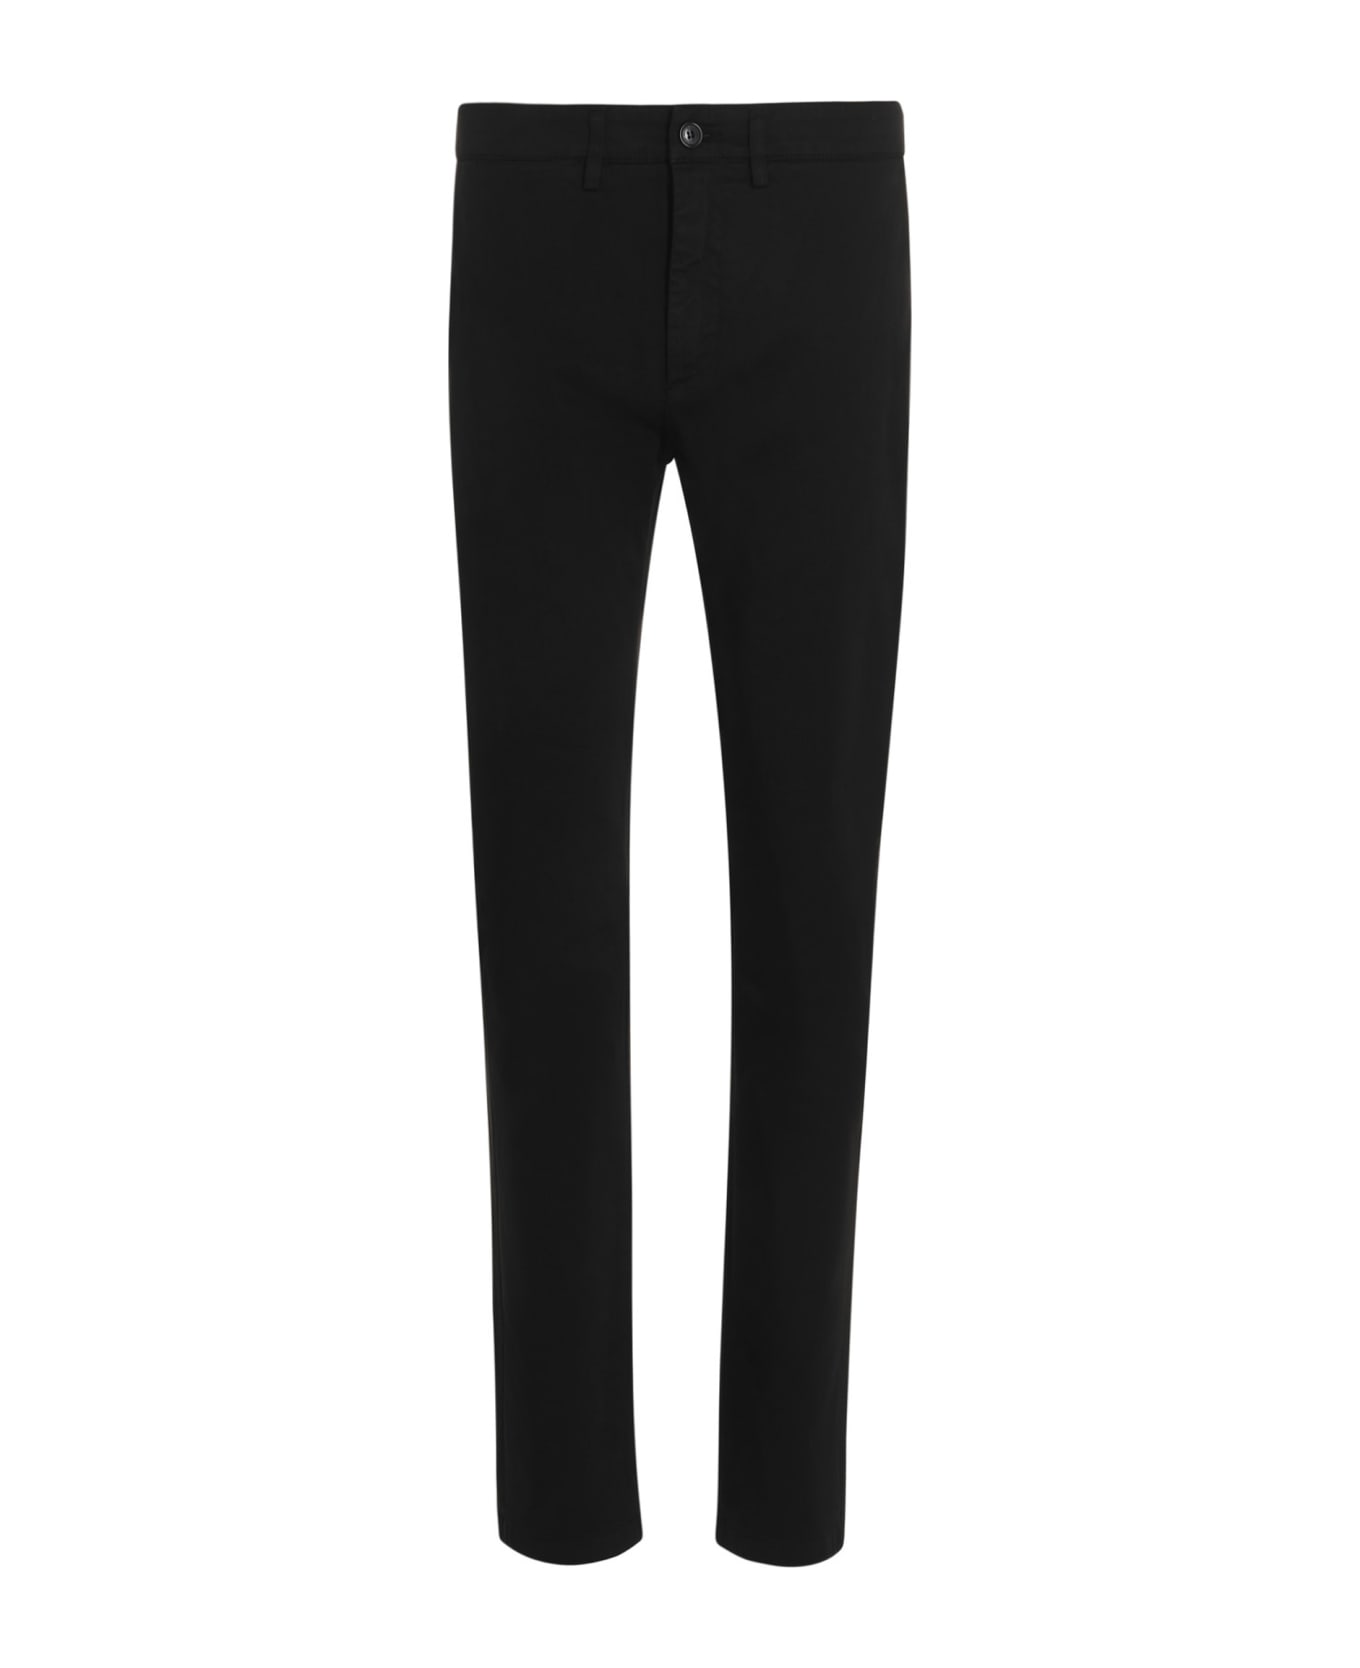 Department Five Mike' Trousers - NERO